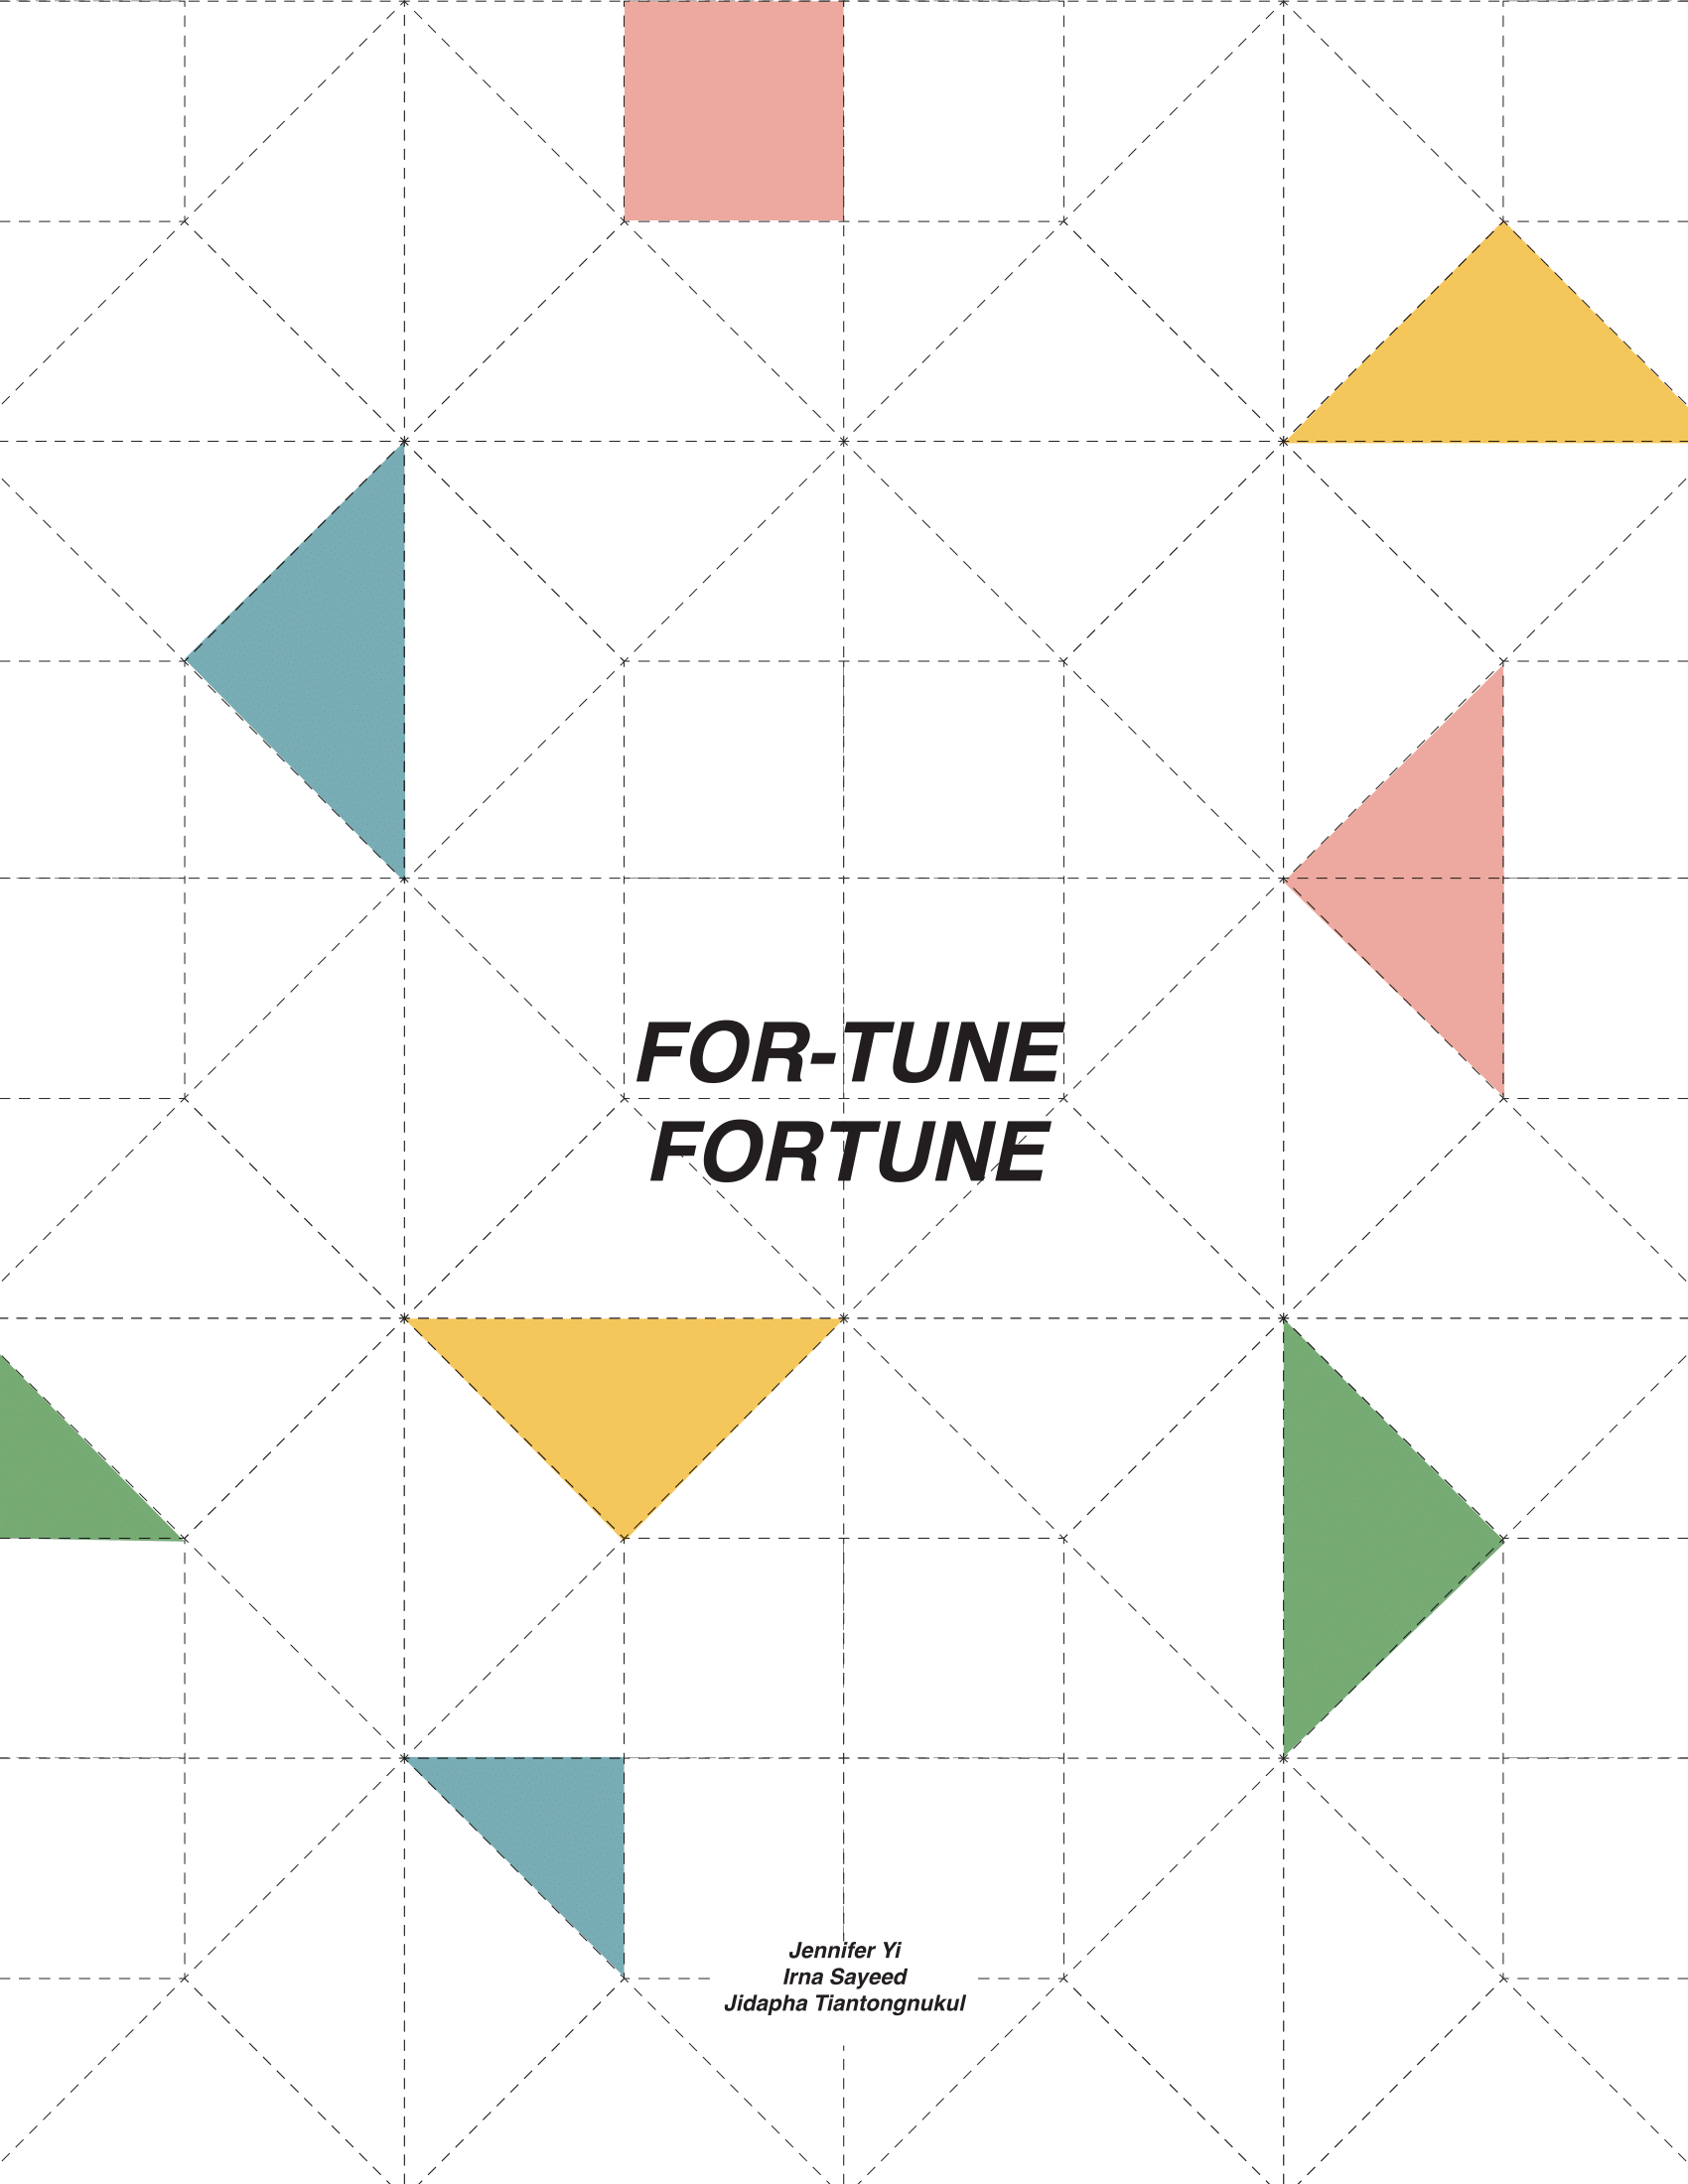 For-tune Fortune-1.png